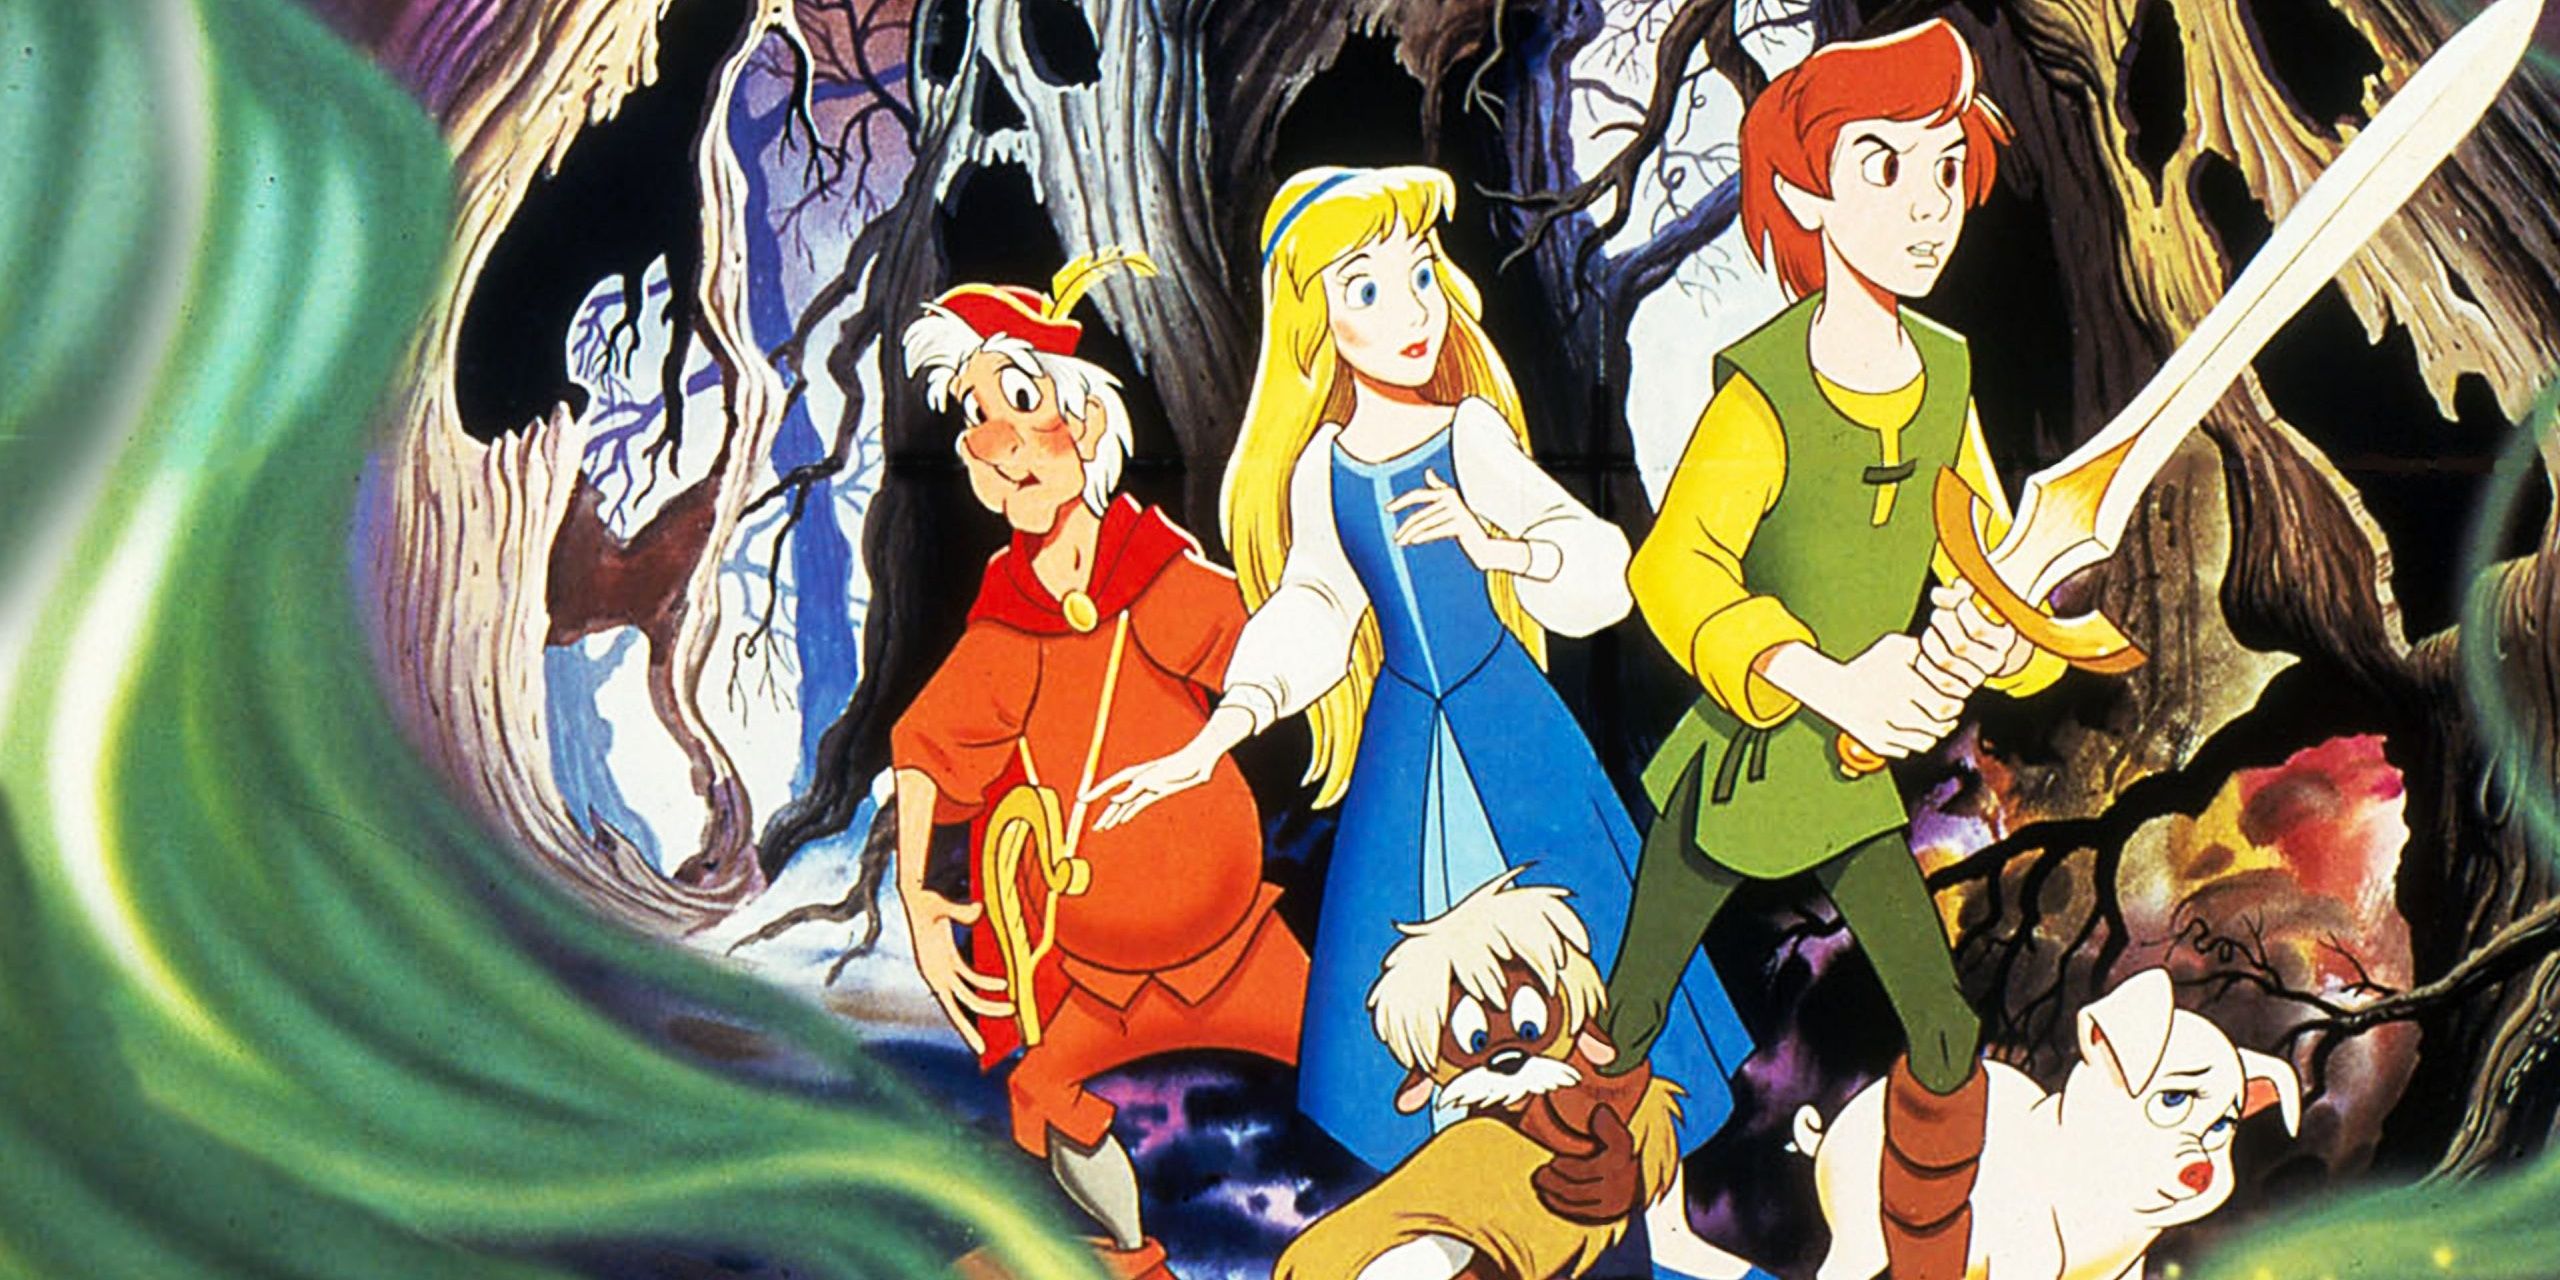 The poster for The Black Cauldron